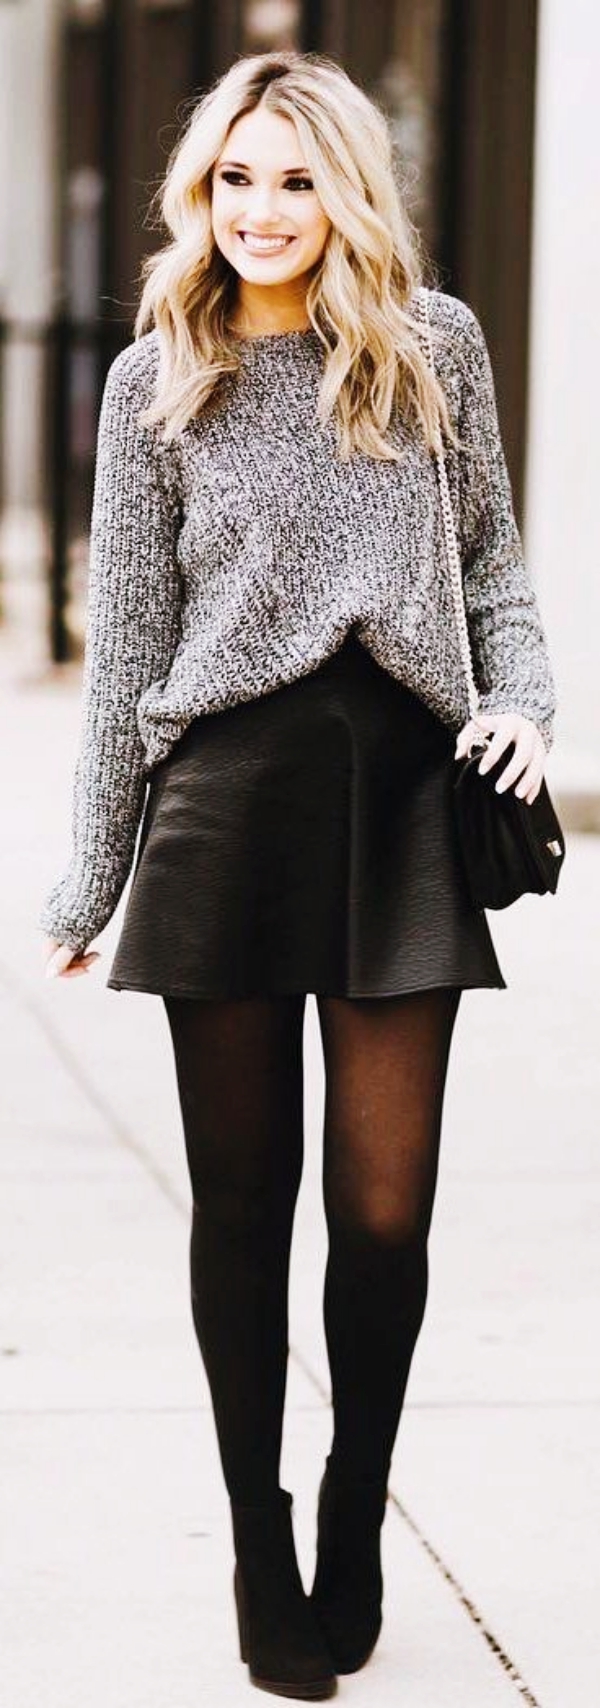 Fall-Outfits-With-Skirts